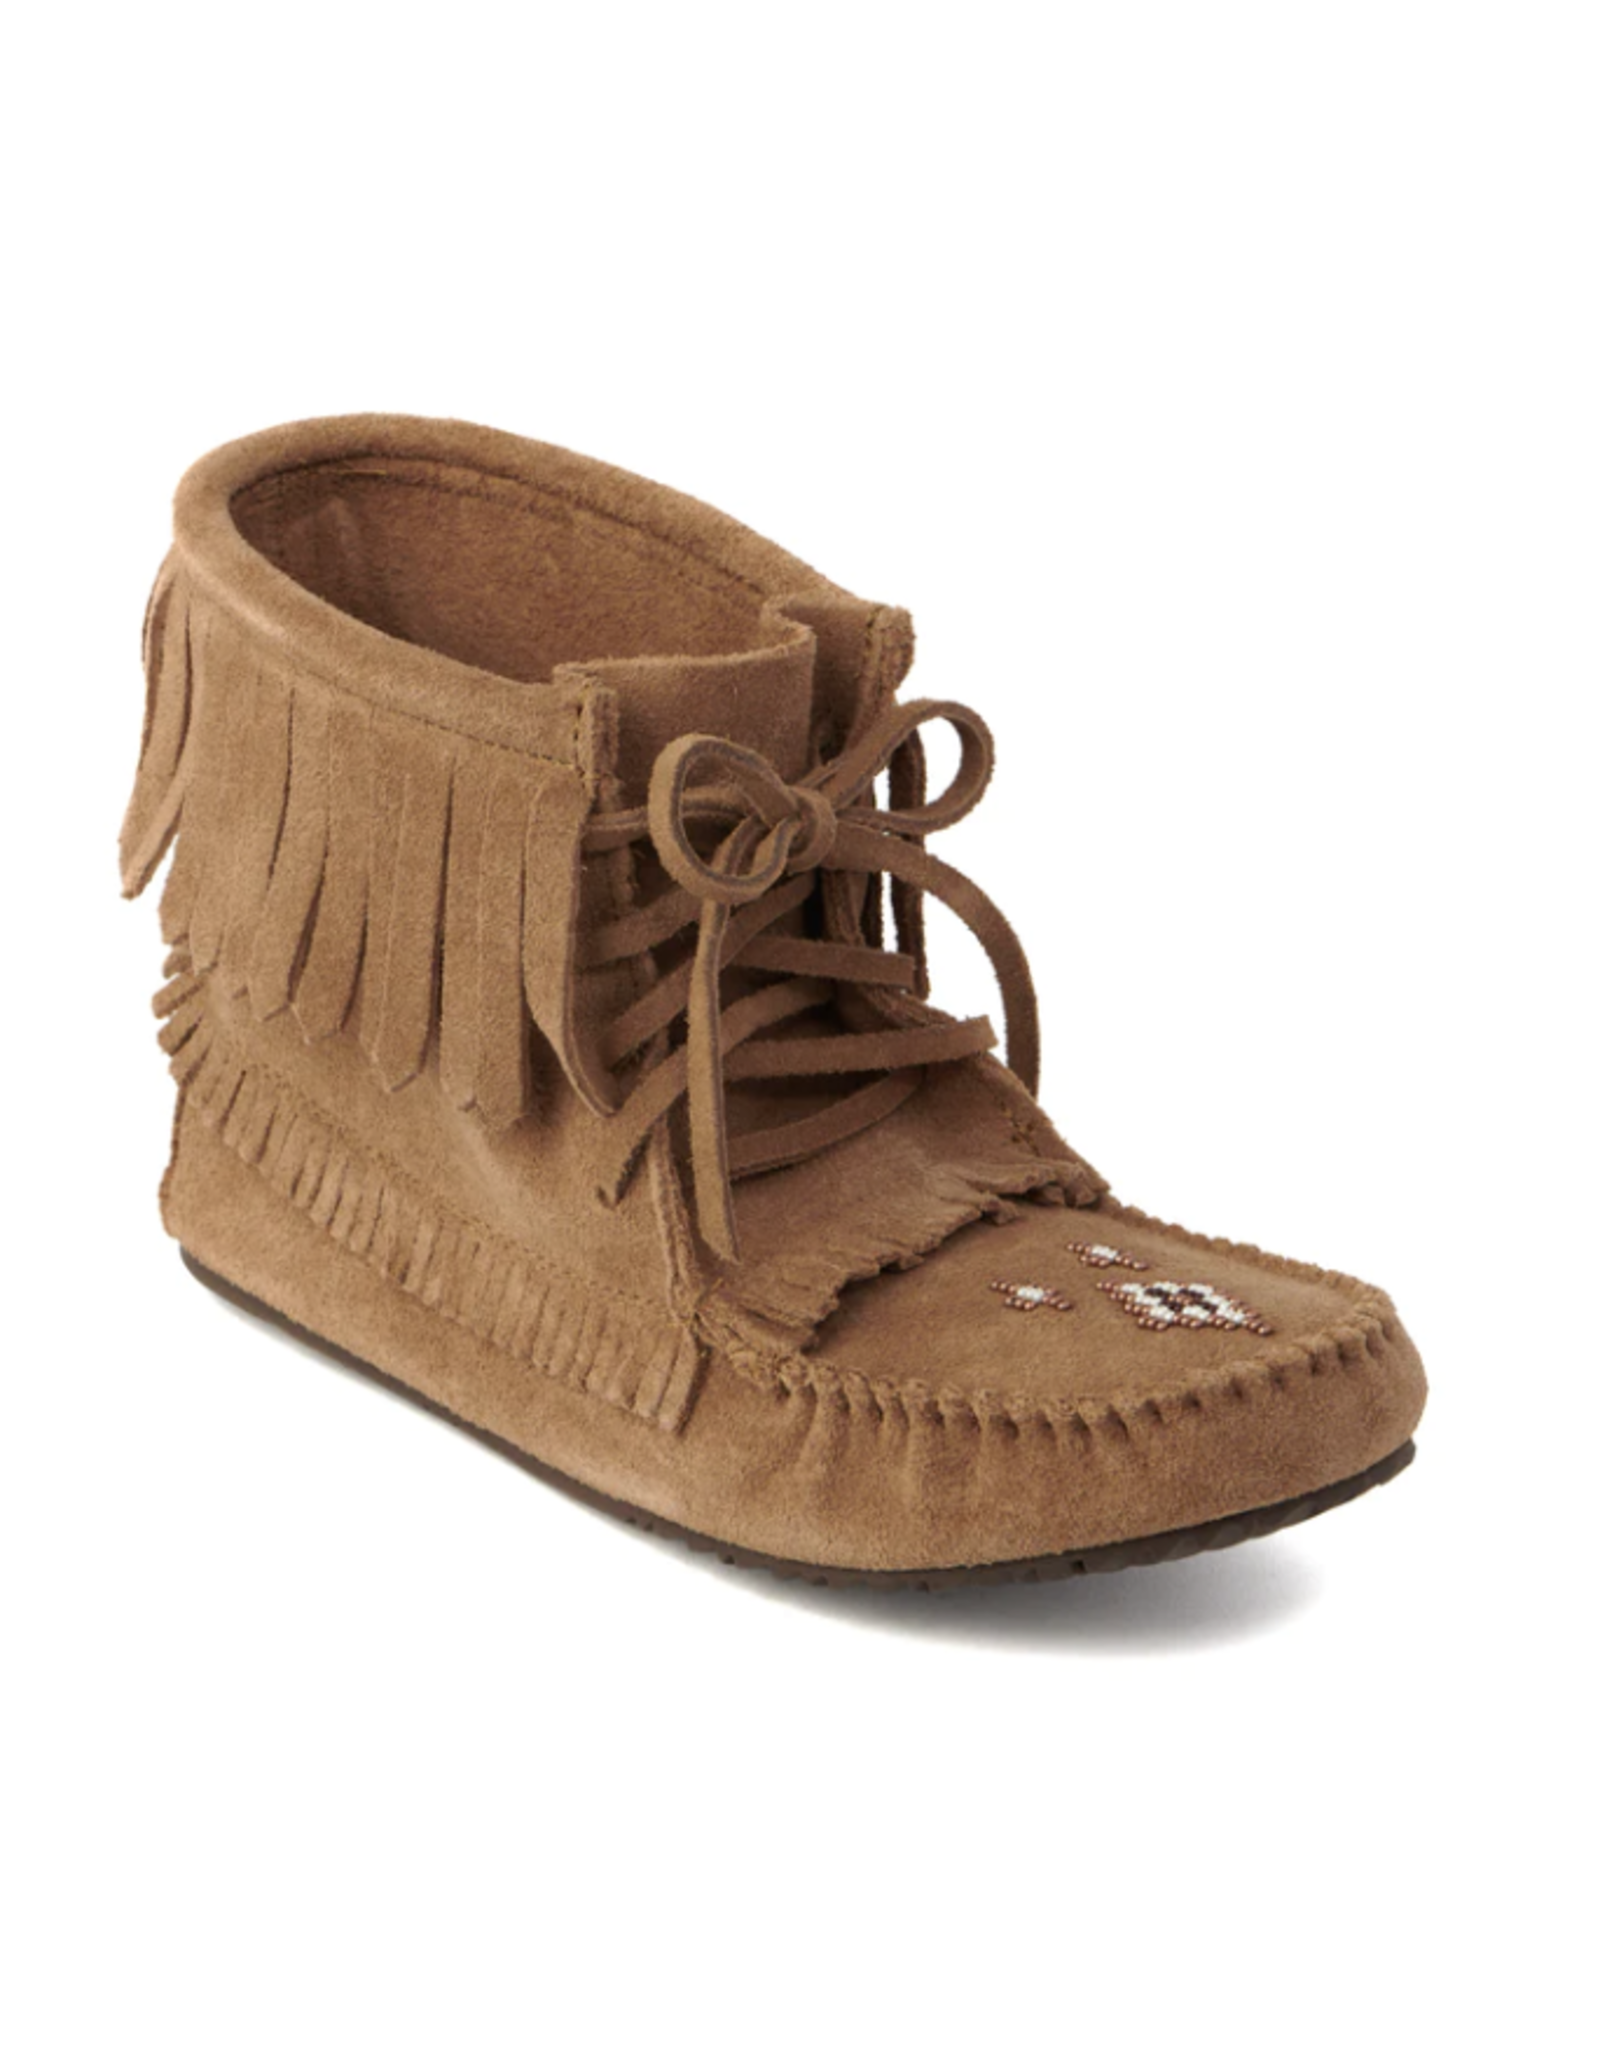 "Harvester" Suede Moccasin Boot (Unlined)